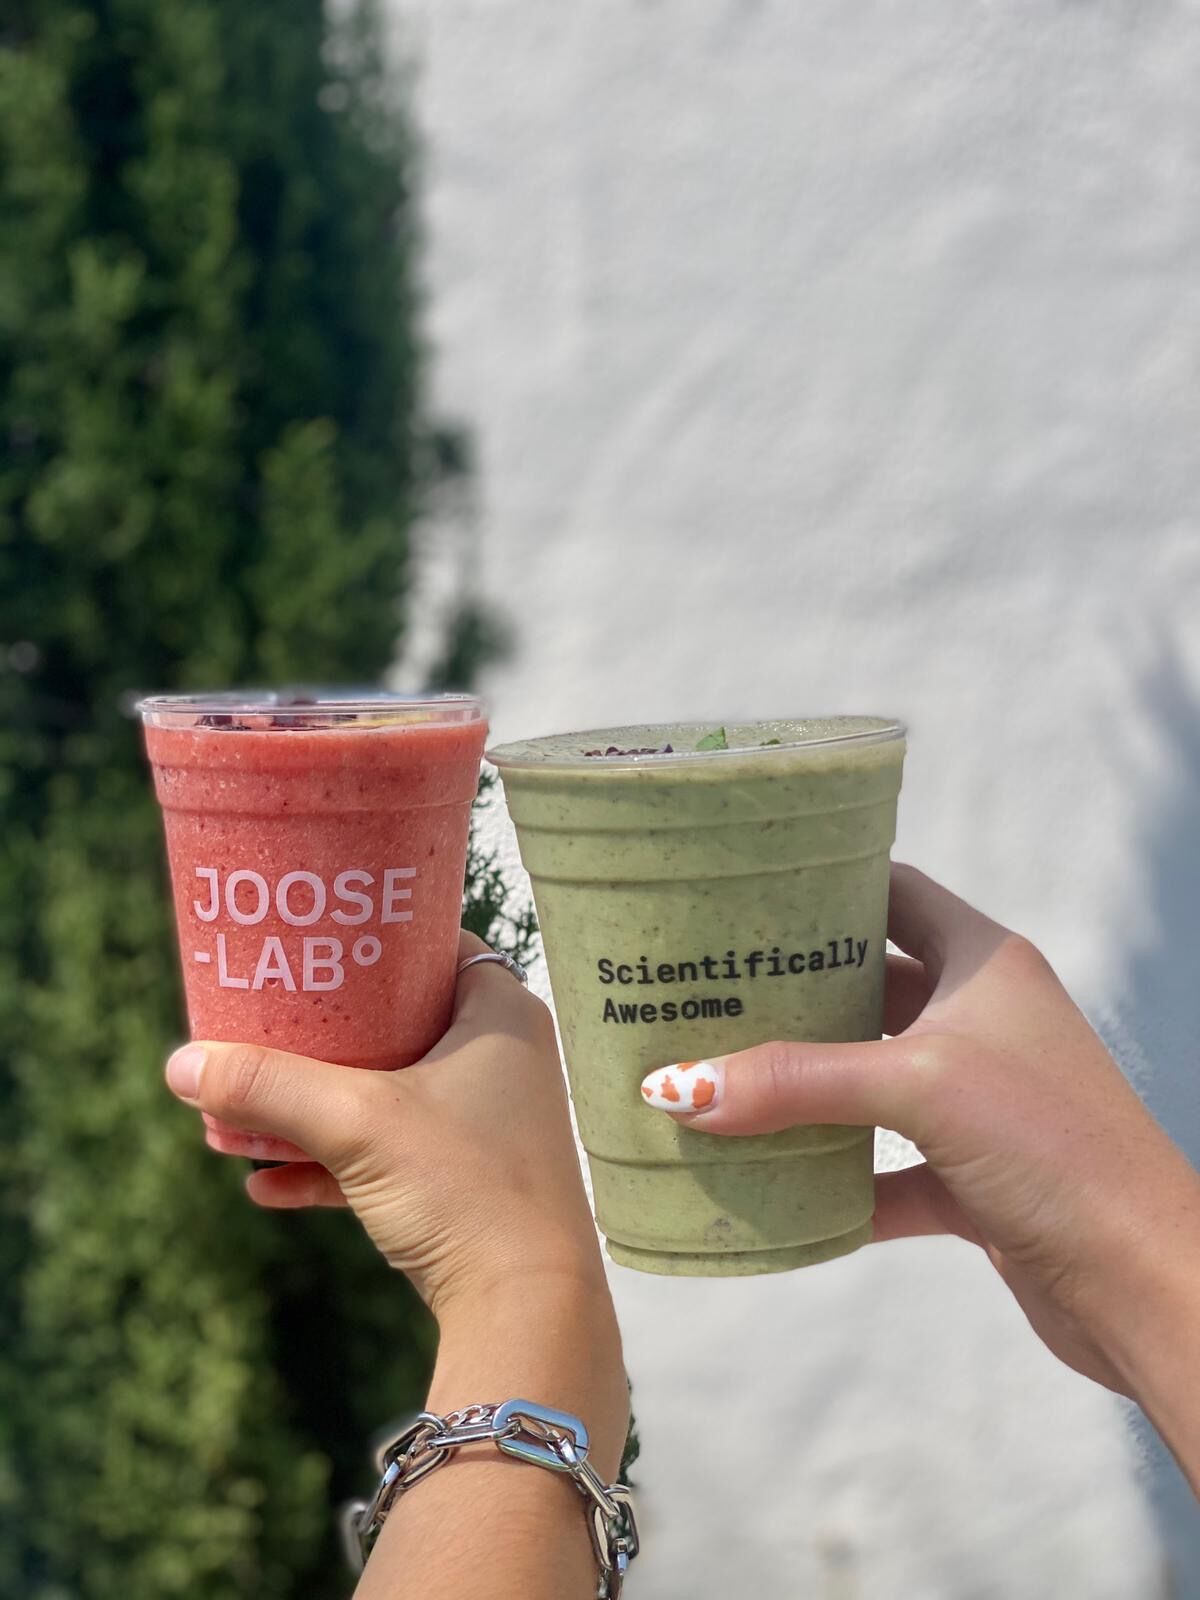 Joose Lab, formerly Juice Crafters, offers juices, smoothies, acai bowls and wellness shots.